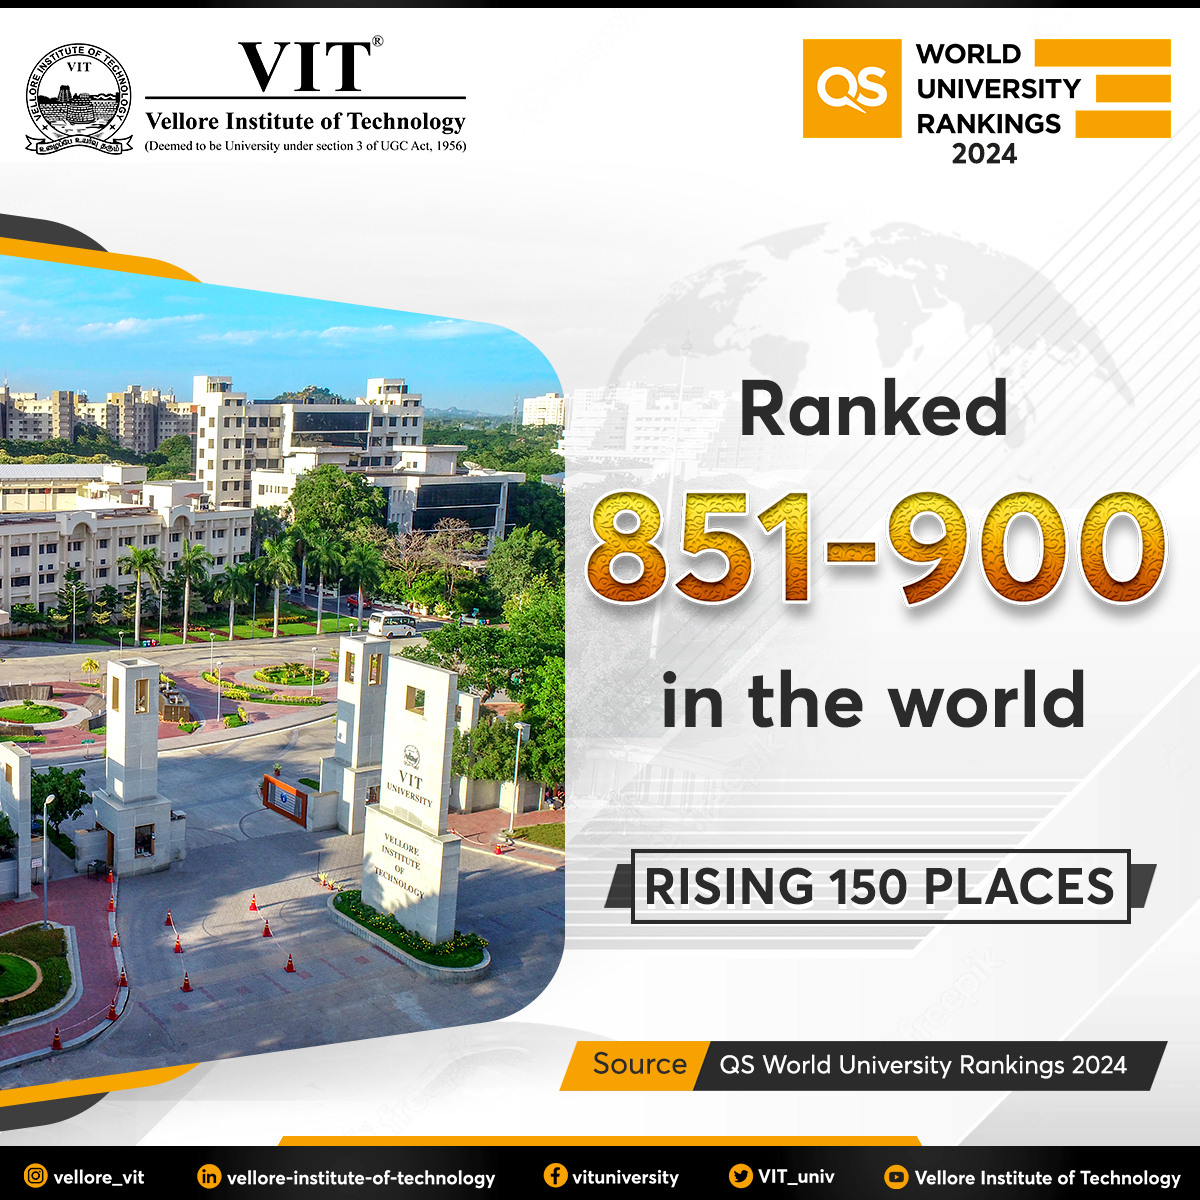 VIT has jumped 150 places from last year rankings and is currently ranked between 851-900 globally in the 2024 QS World University Rankings!

#VIT #UniversityRankings #QS2024 #WorldRankings